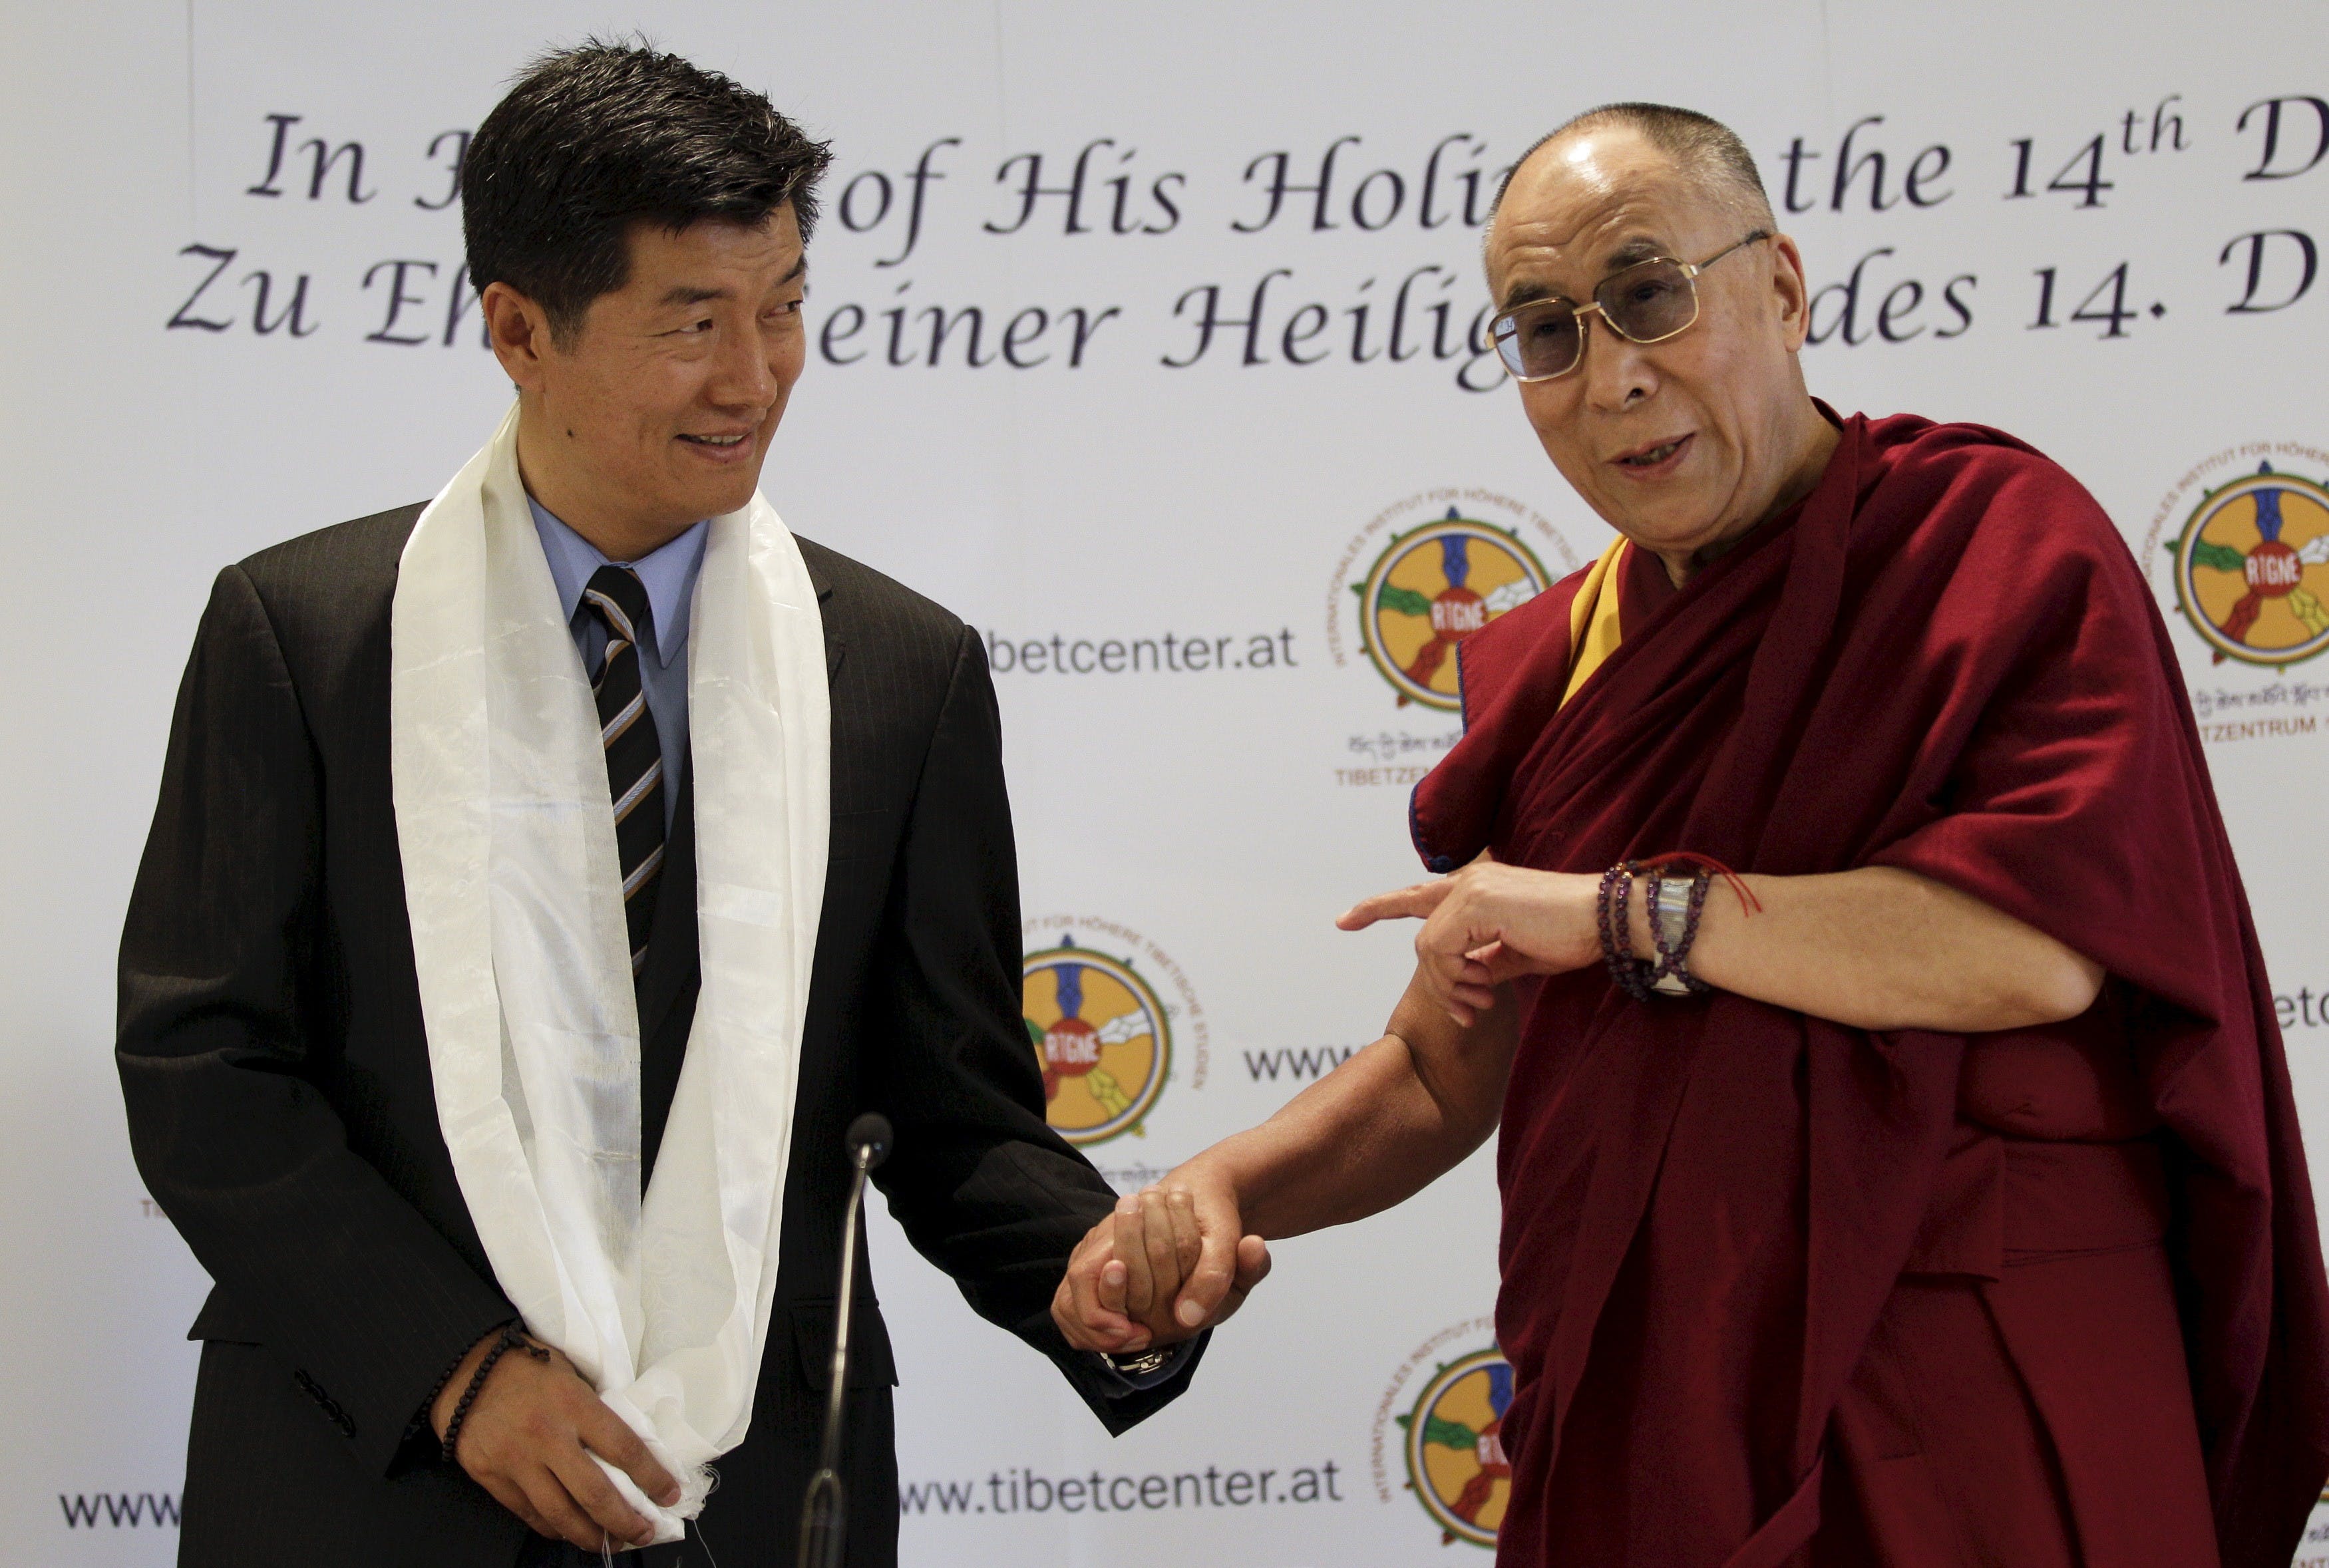 File photo of Tibet's exiled spiritual leader the Dalai Lama and Lobsang Sangay, Prime Minister of the Tibetan government-in-exile, arriving in Vienna